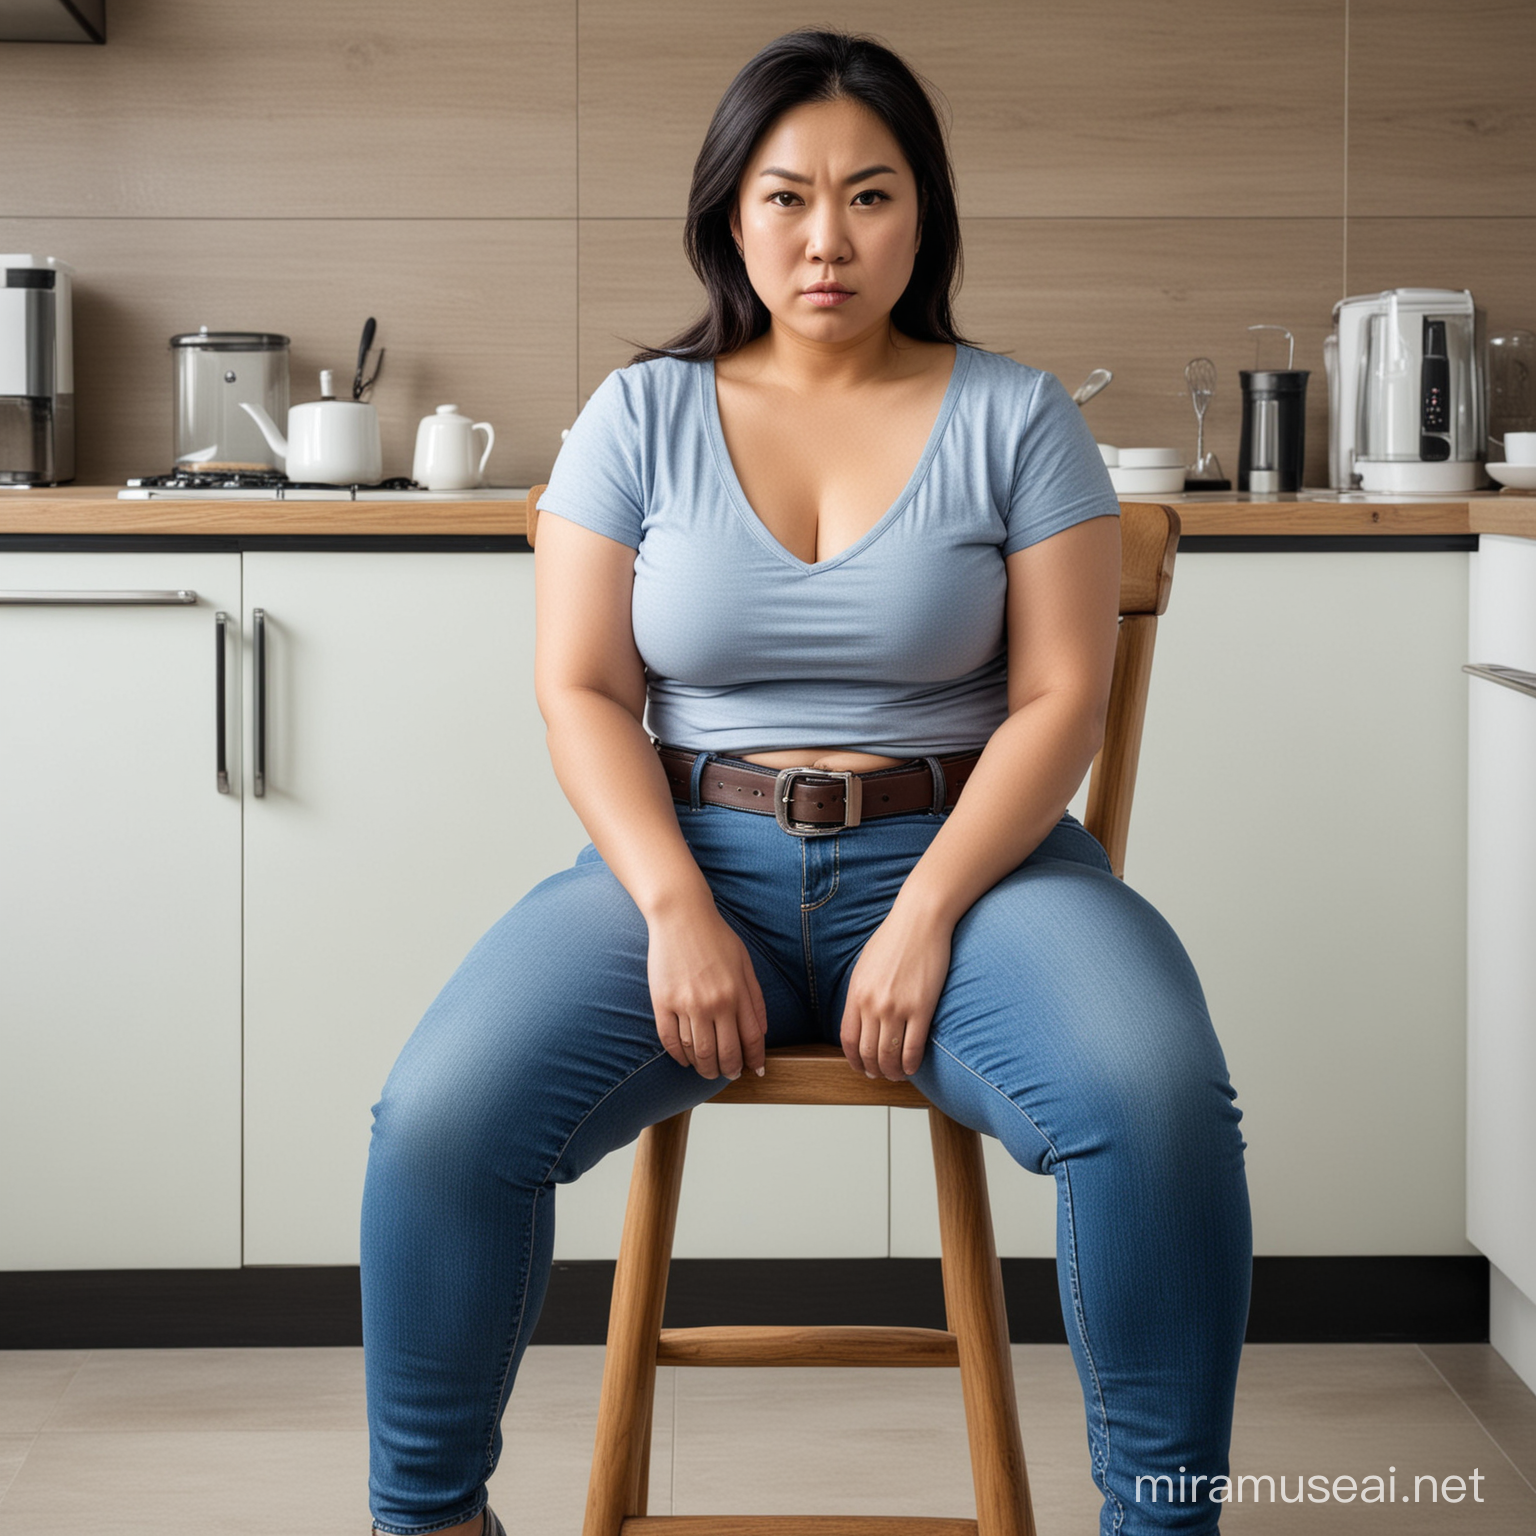 real photo of an angry,curvy asian mother,sitting on a chair,stern face,skinny jeans with belt,kitchen